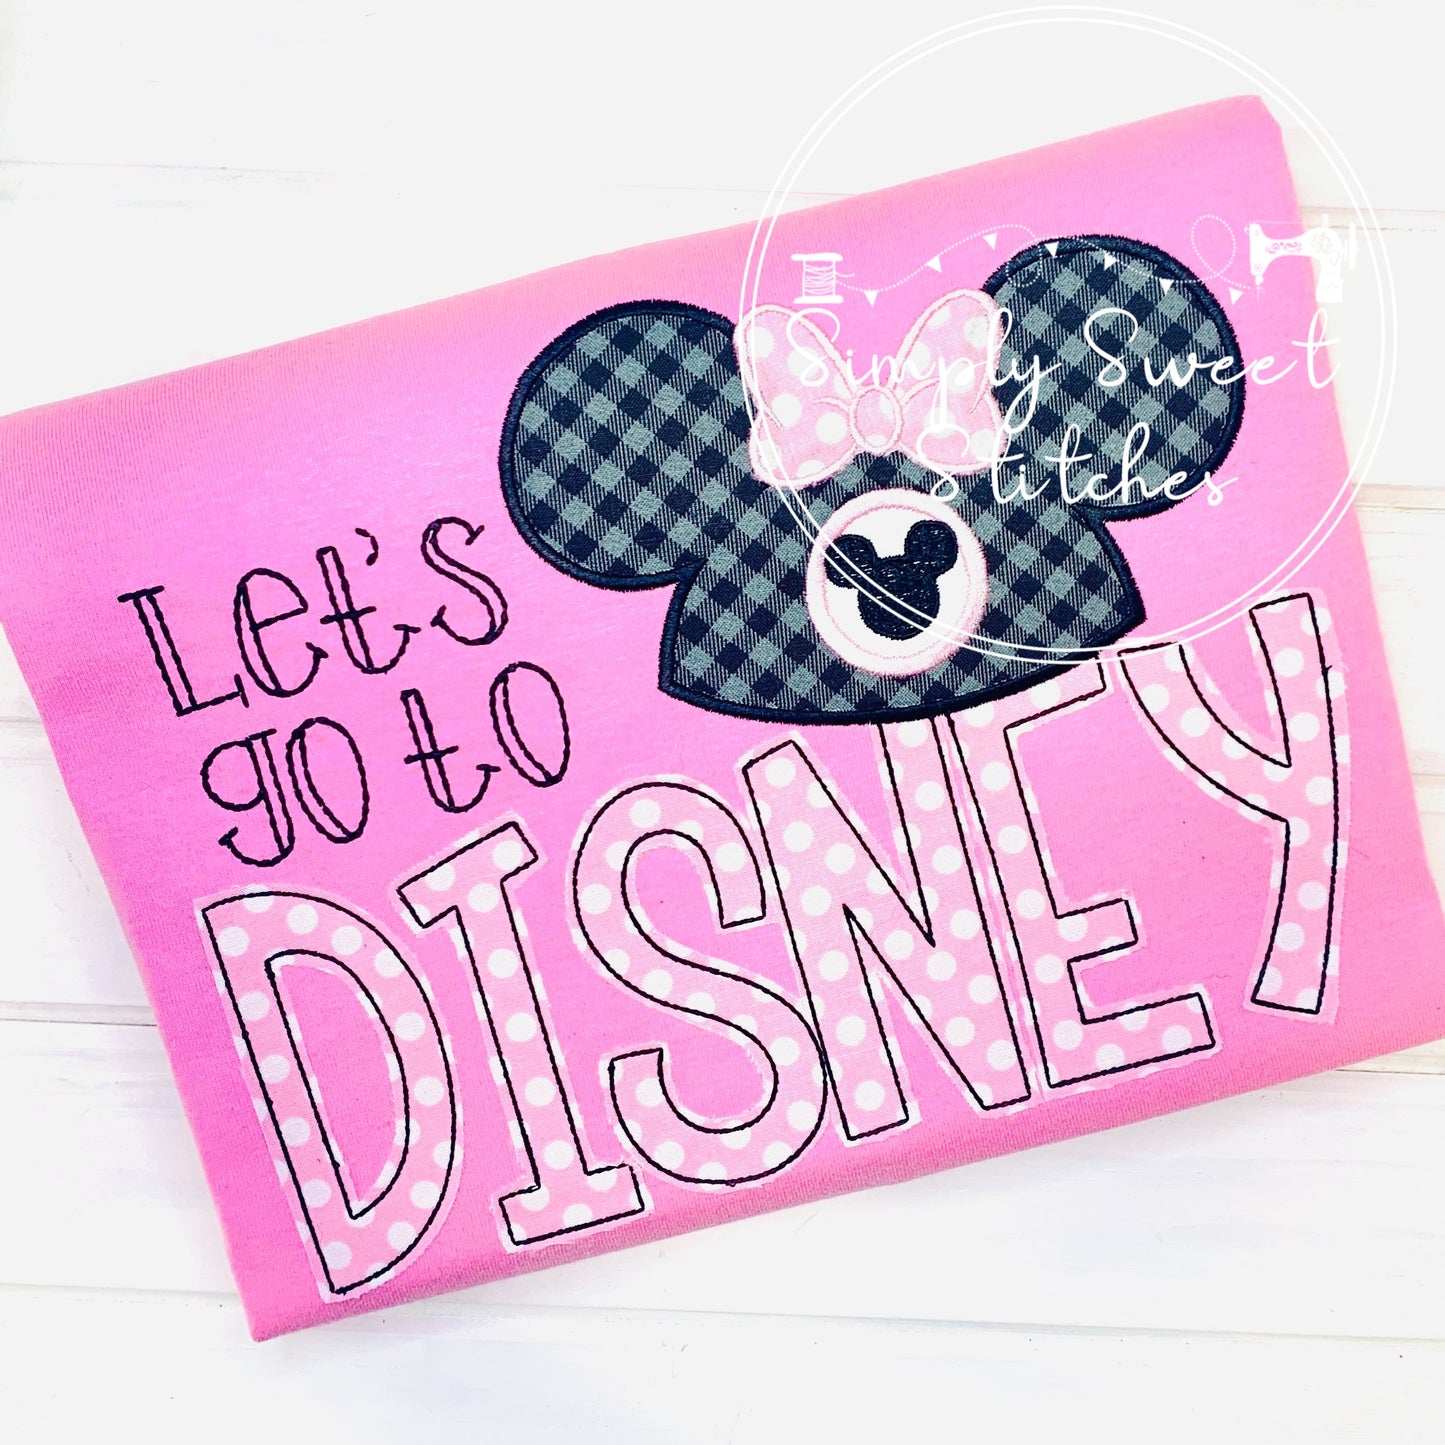 2273 - LETS GO TO DISNEY - EMBROIDERY ADULT SHIRT